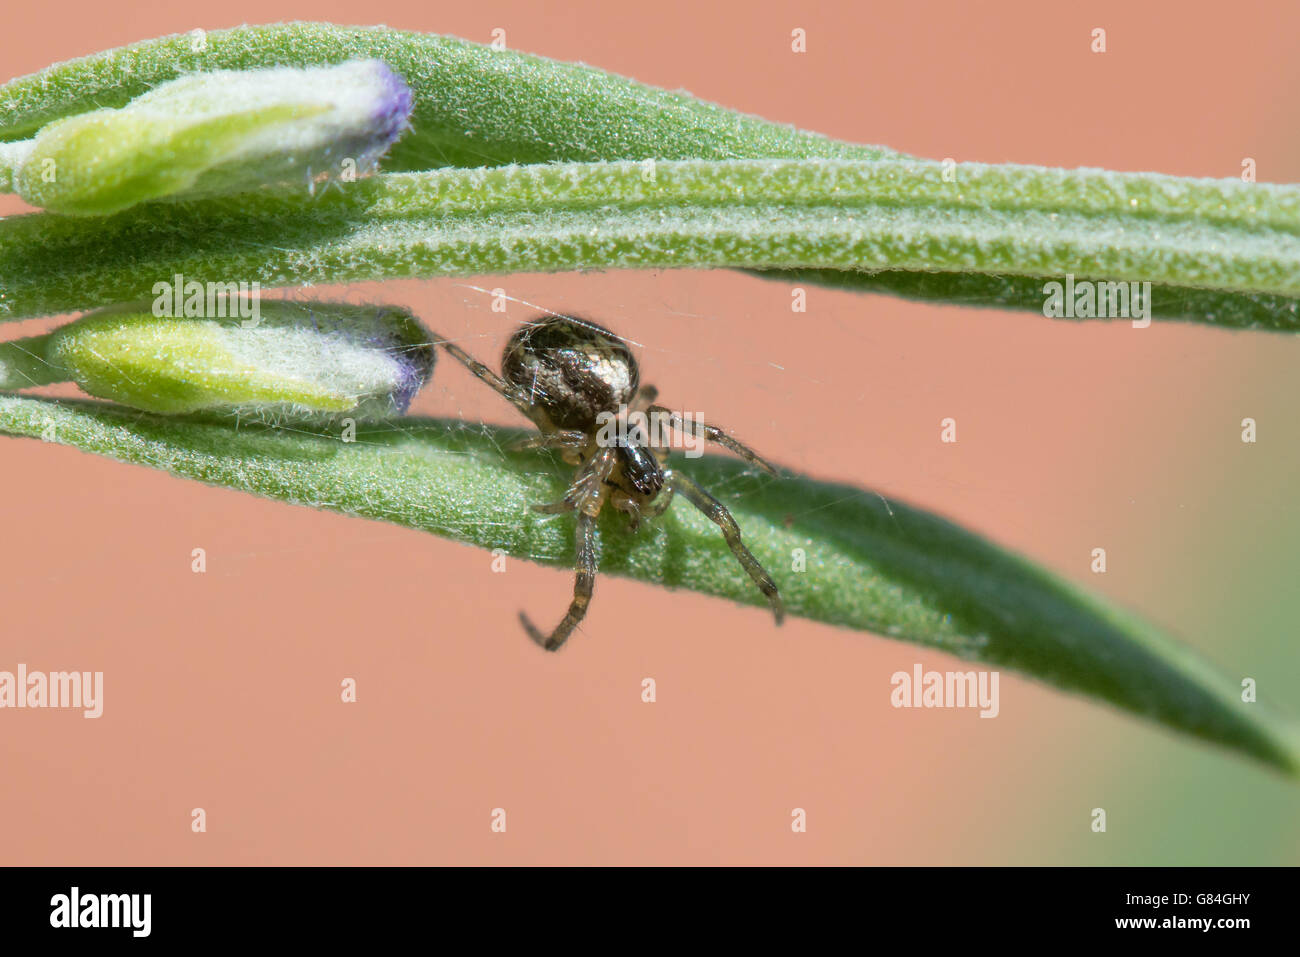 Missing Sector Orb Web Spider (Zygiella x-notata) on budding Lavender. Stock Photo